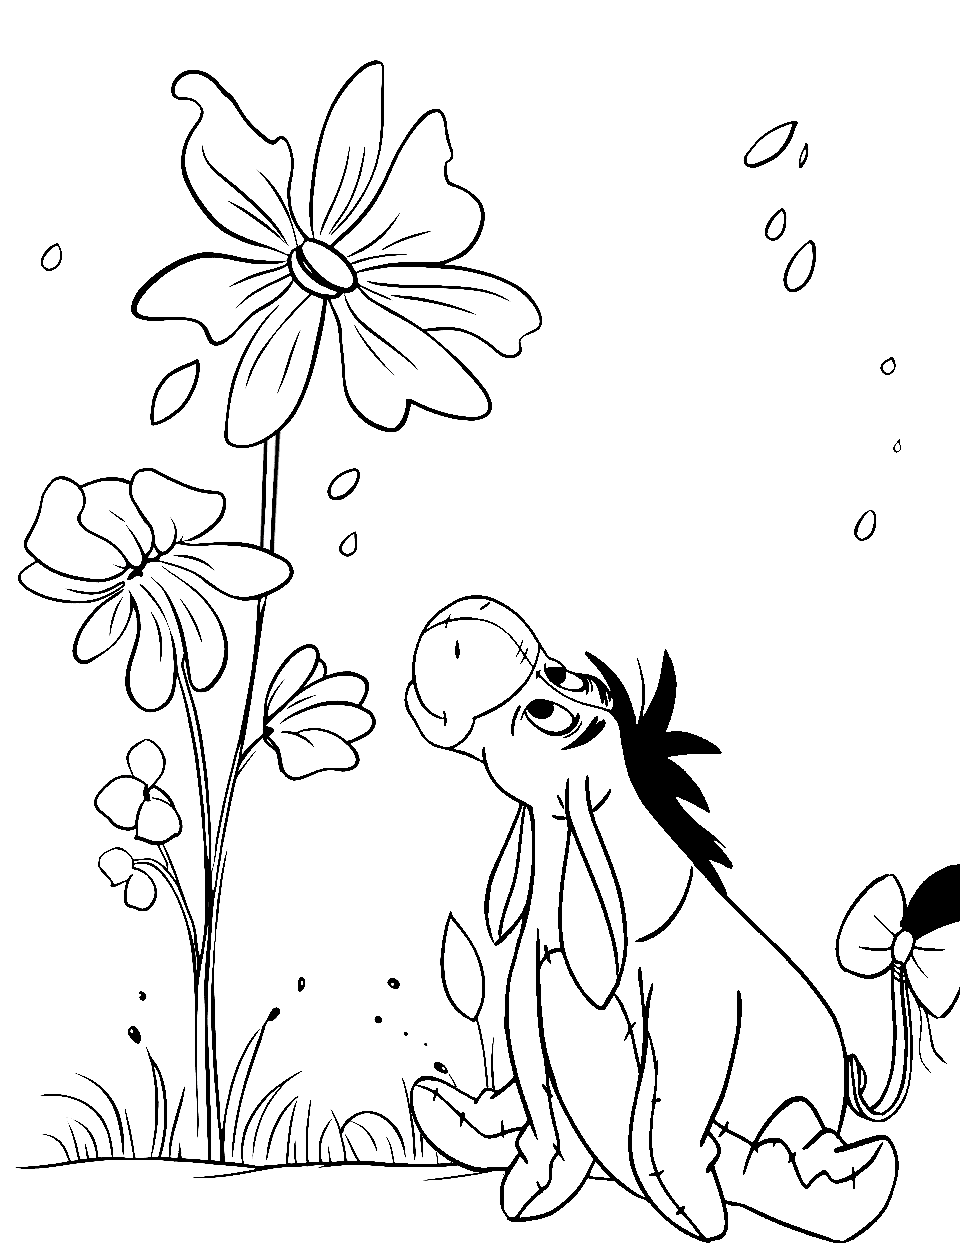 Spring Flower Bloom Coloring Page - A joyful scene where Eeyore is with a large blooming flower in spring.